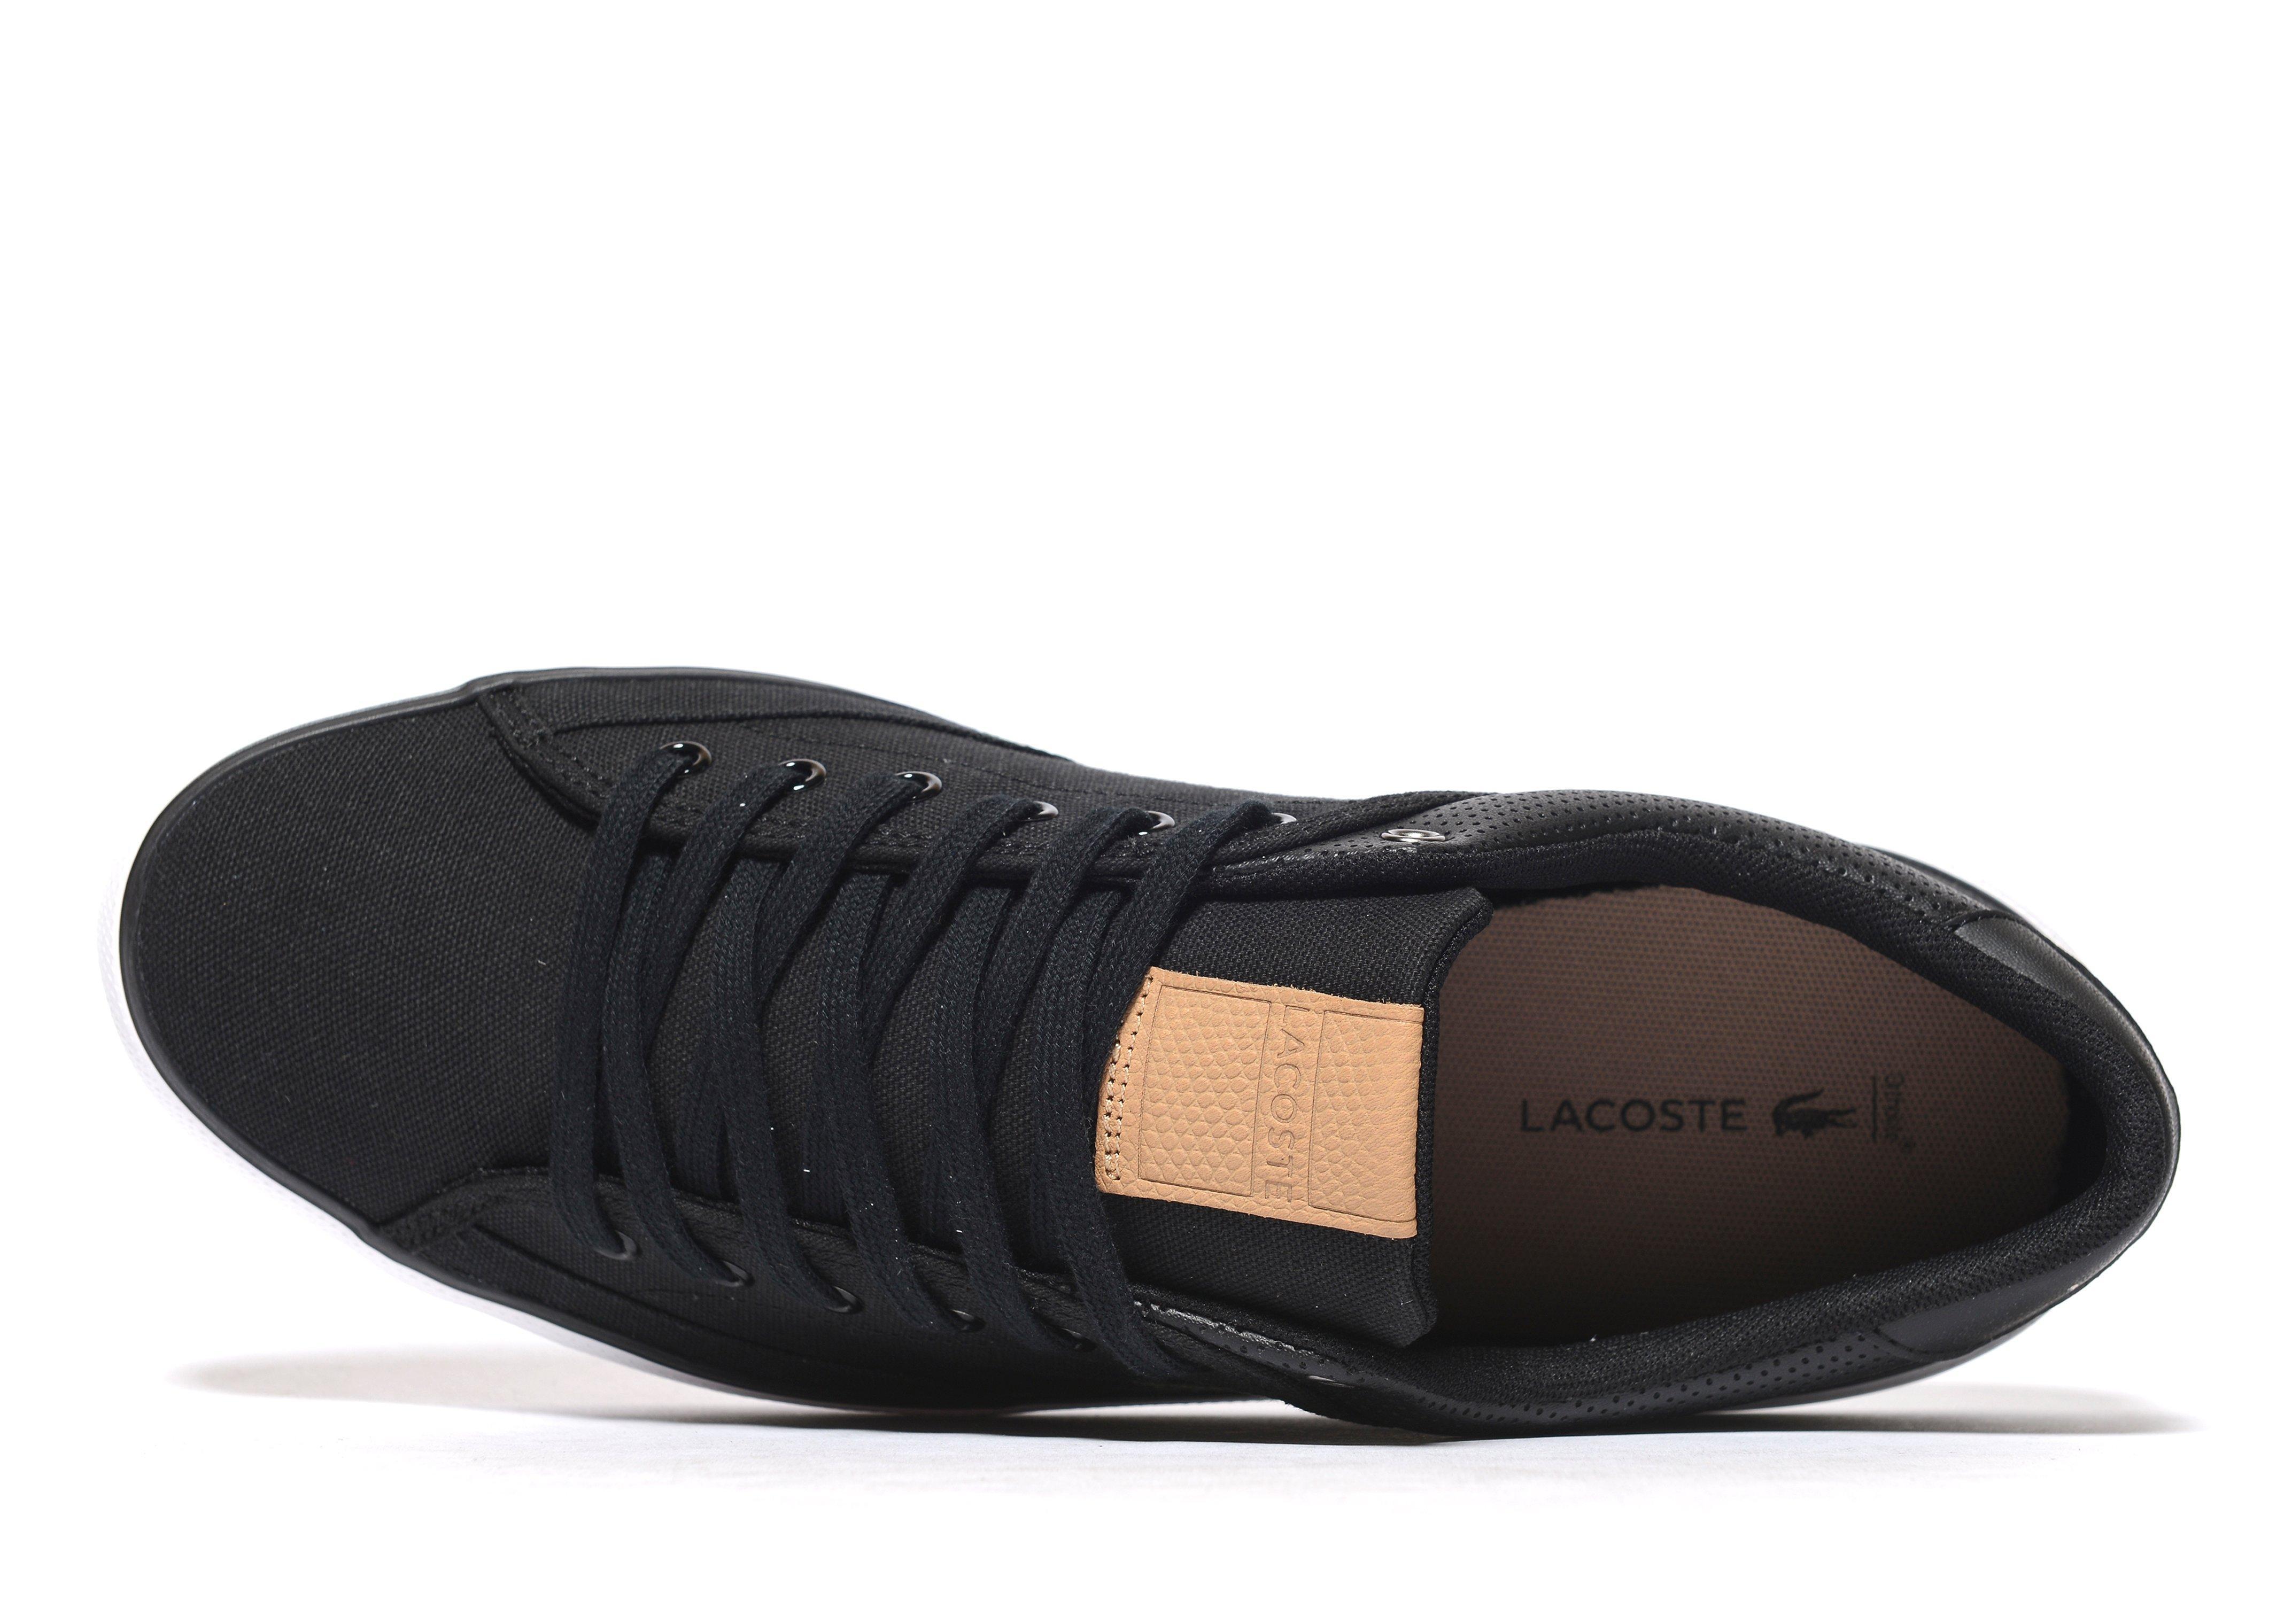 Parity \u003e lacoste angha black, Up to 79% OFF